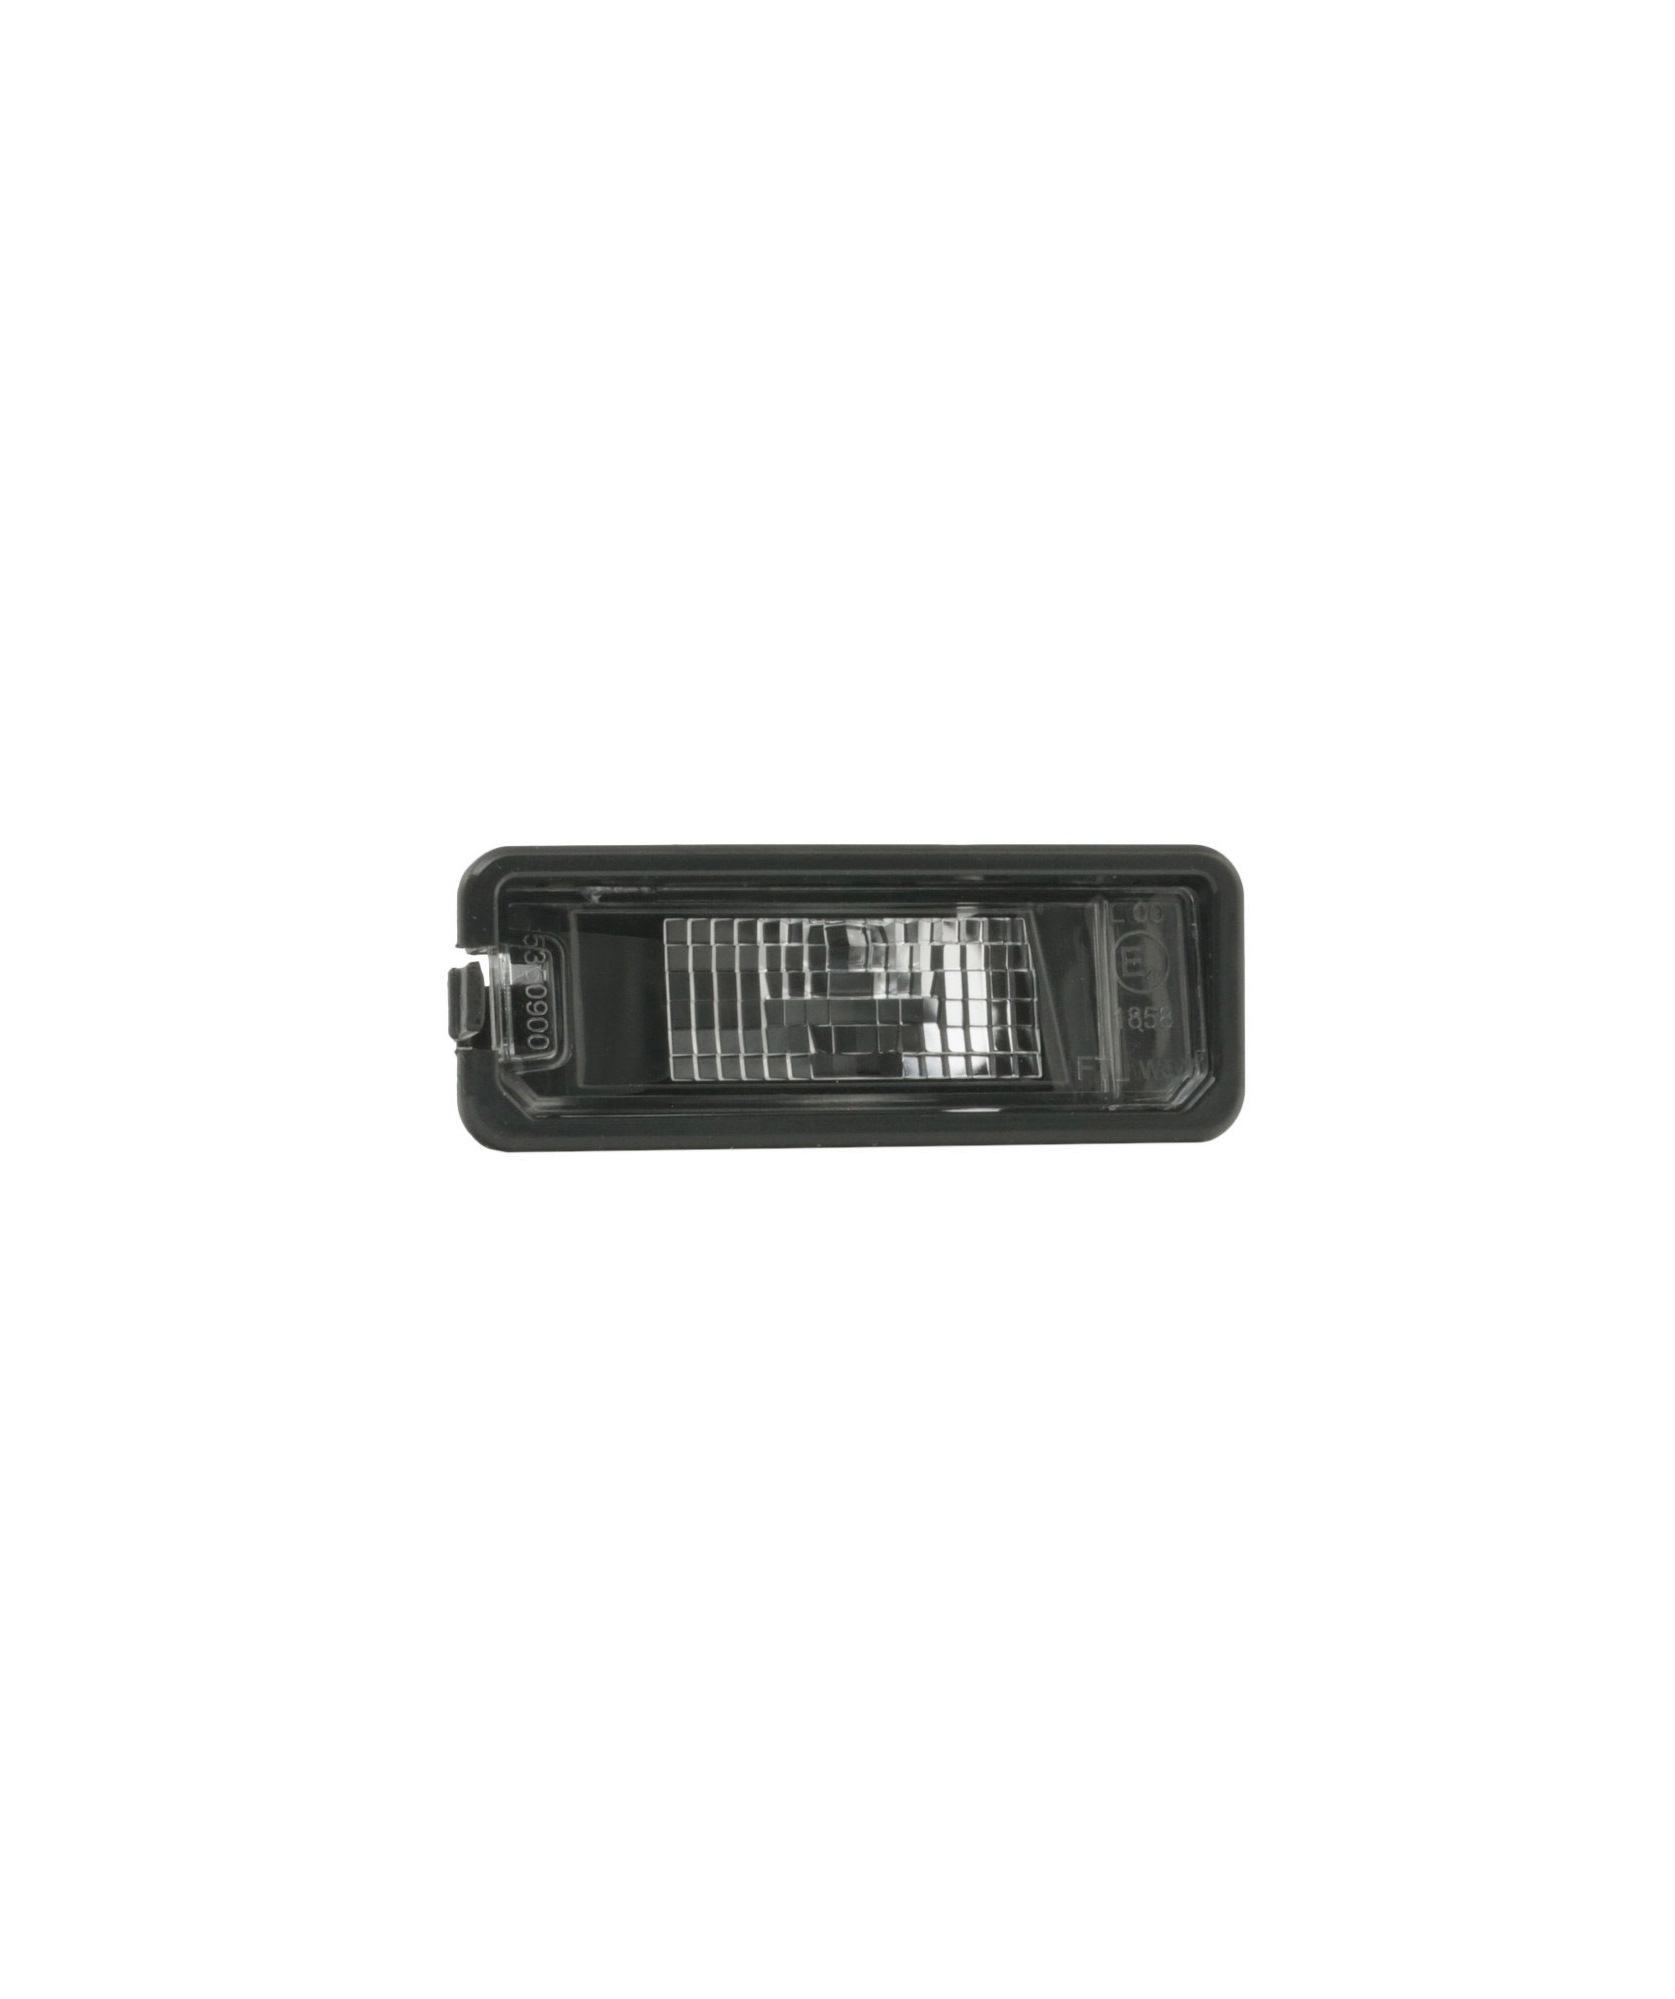 Volkswagen Licence Plate Light ABAKUS 053-50-900 at a good price